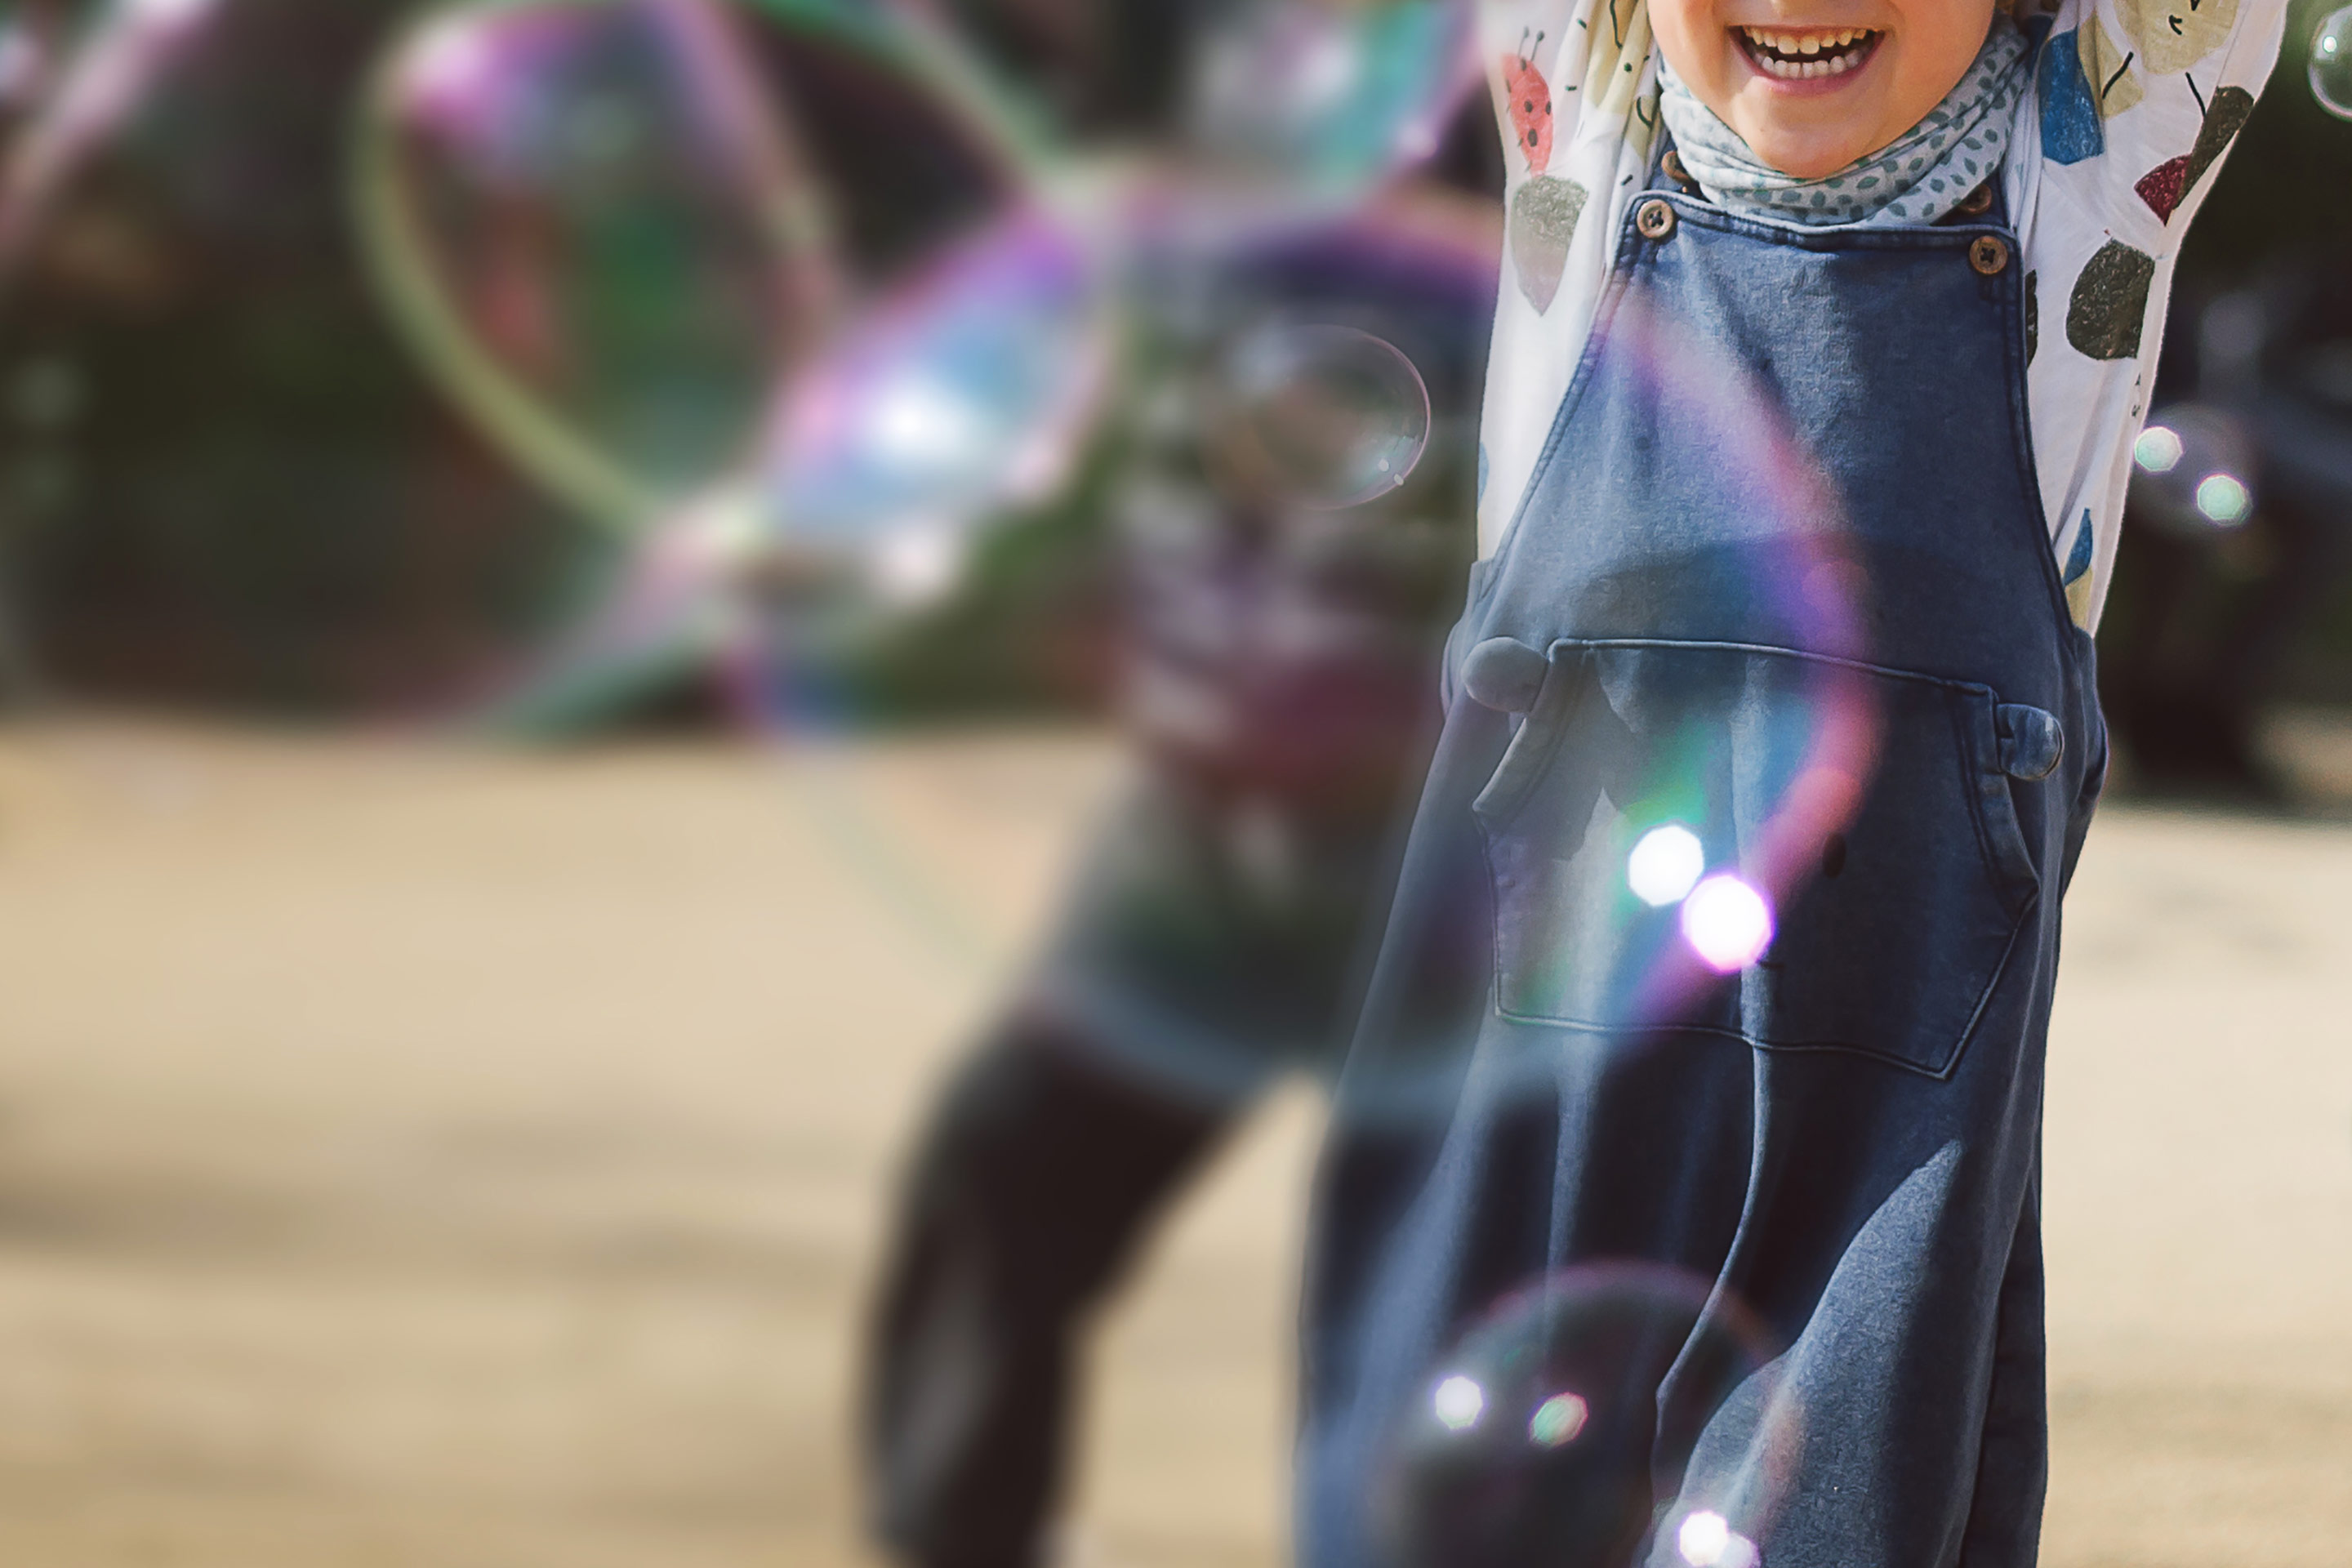 Small children having fun playing with bubbles, a reminder of what's most important about investing.